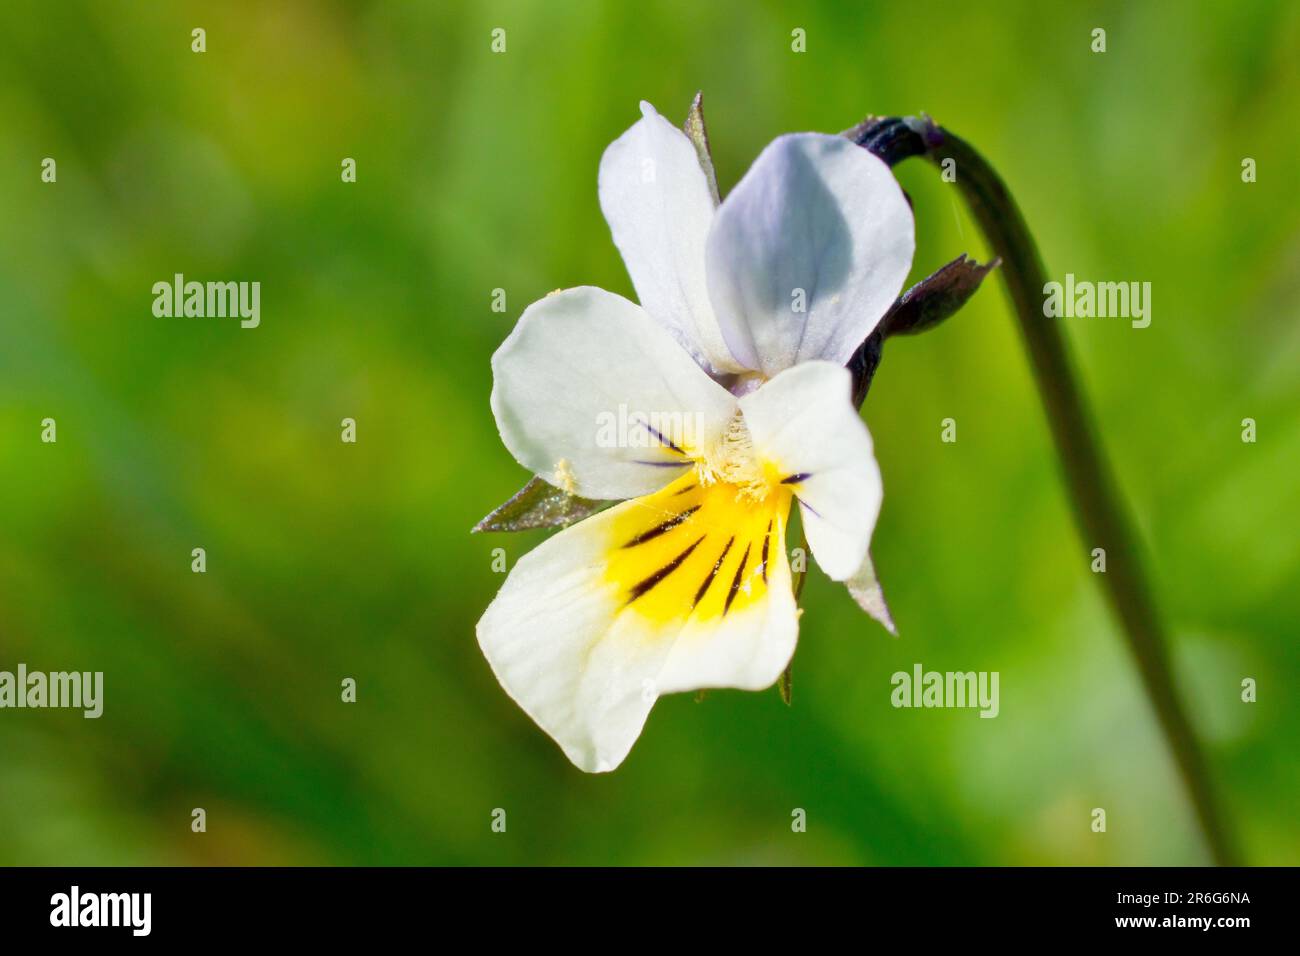 Field Pansy (viola arvensis), close up of a solitary flower of the farmland plant, isolated against a green background. Stock Photo